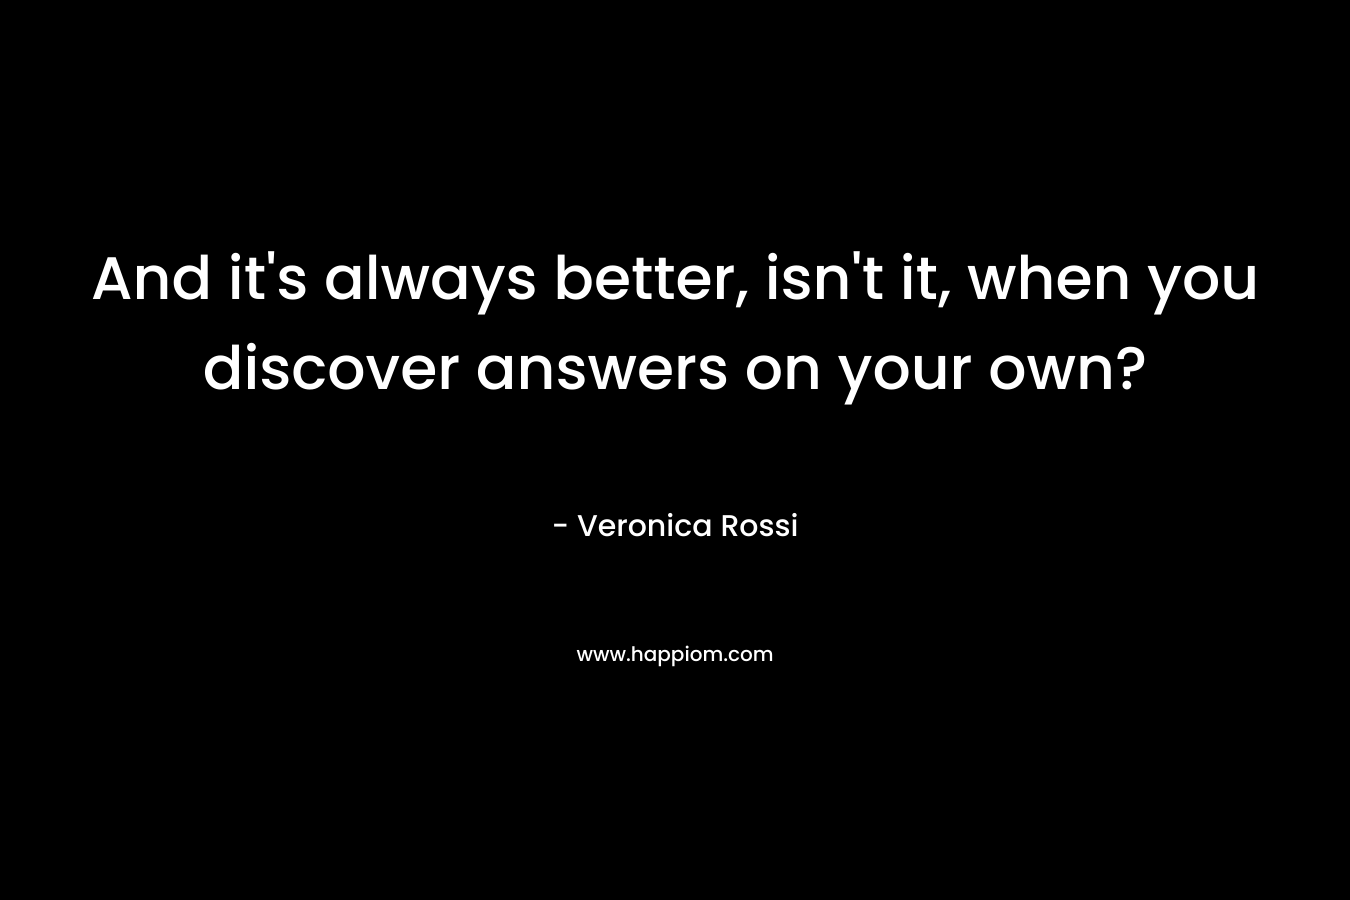 And it’s always better, isn’t it, when you discover answers on your own? – Veronica Rossi